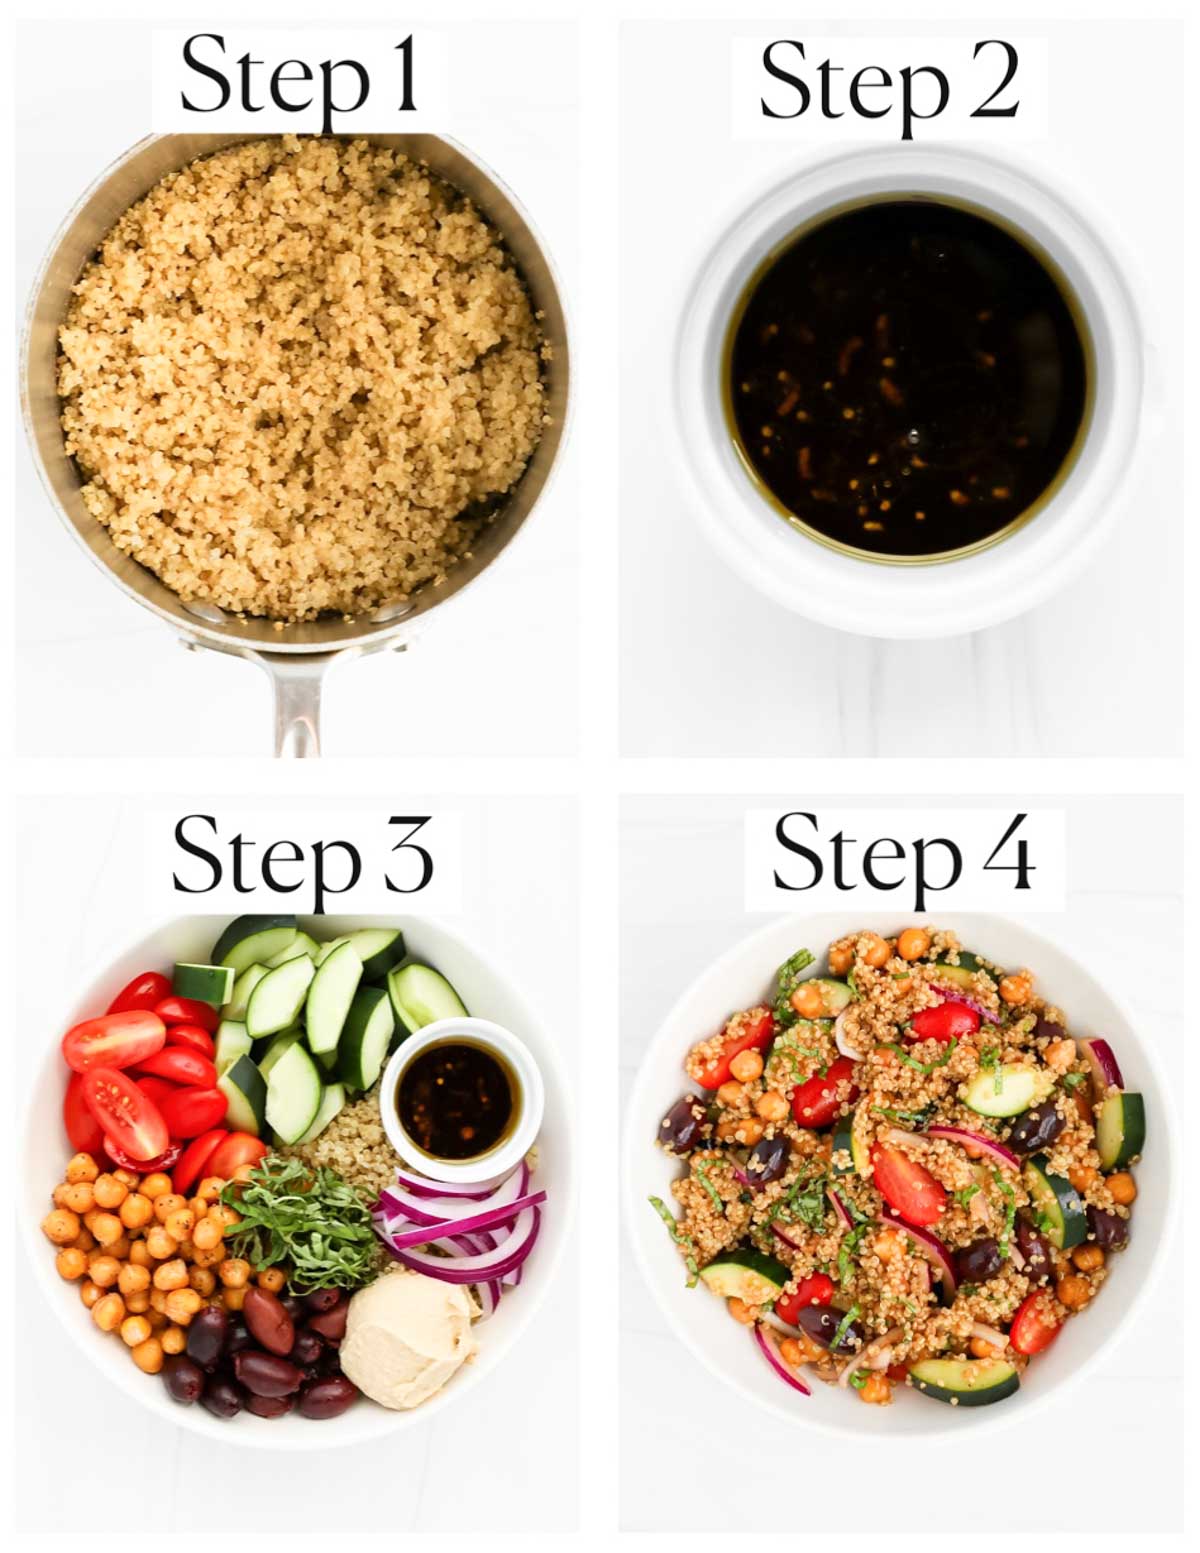 A collage of four images labeled "step 1-step 4". Step 1: cooked quinoa in a pot. Step 2: balsamic dressing in a small white bowl. Step 3: ingredients including vegetables, quinoa, hummus, and herbs, sectioned off in a white bowl. Step 4: all ingredients mixed together in a bowl.